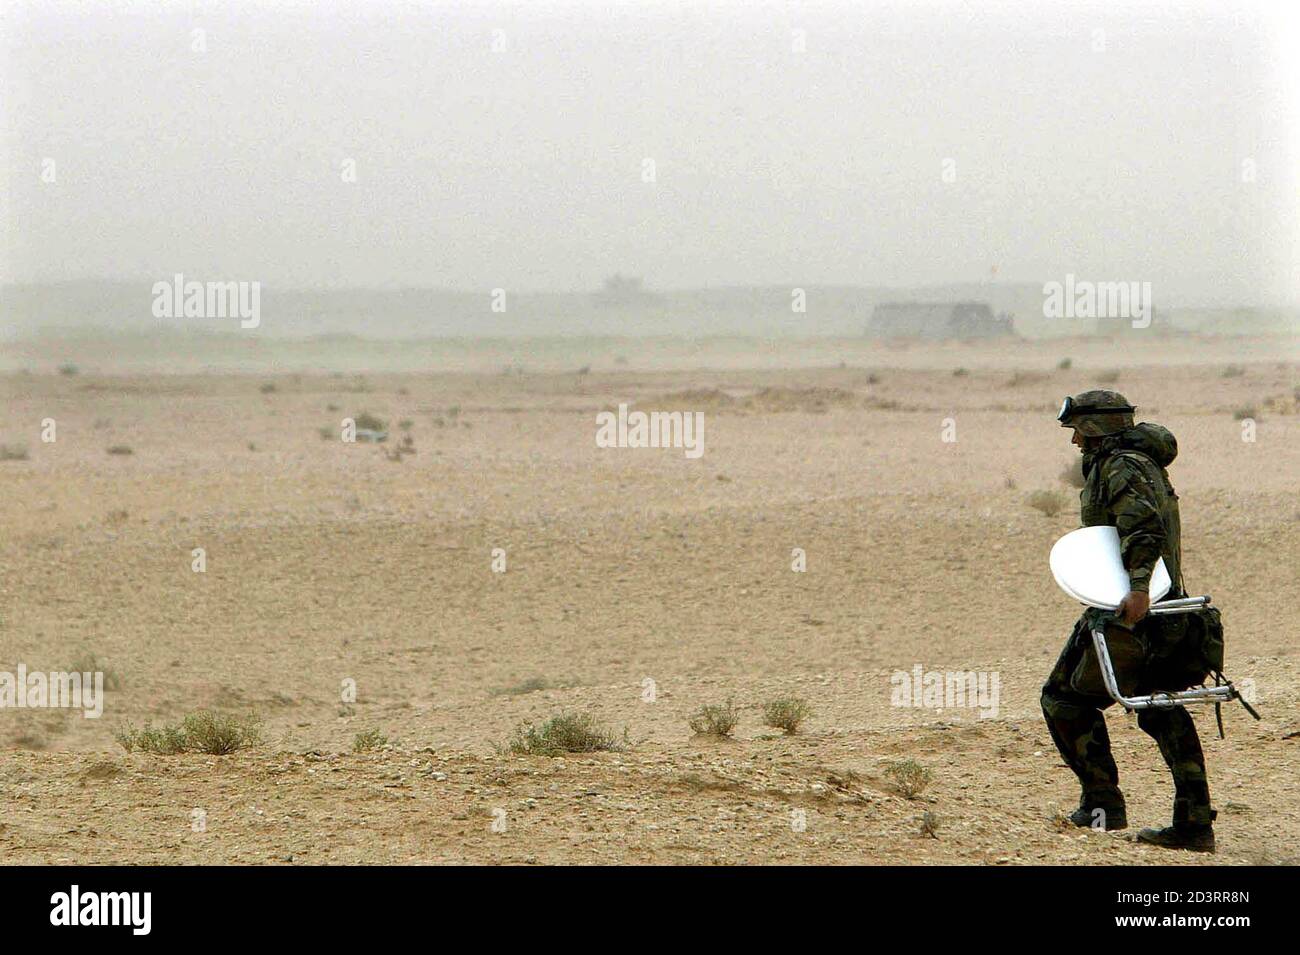 A U.S. Army engineer carries his selfmade mobile toilette seat as he searches a private place out in the desert in the south of the city of Najaf in central Iraq, March 23, 2003. The United States cast doubt on Monday on the fate of Saddam Hussein despite a defiant televised speech by the Iraqi President hailing resistance to U.S. and British invasion forces. REUTERS/Kai Pfaffenbach  KP/AA Stock Photo